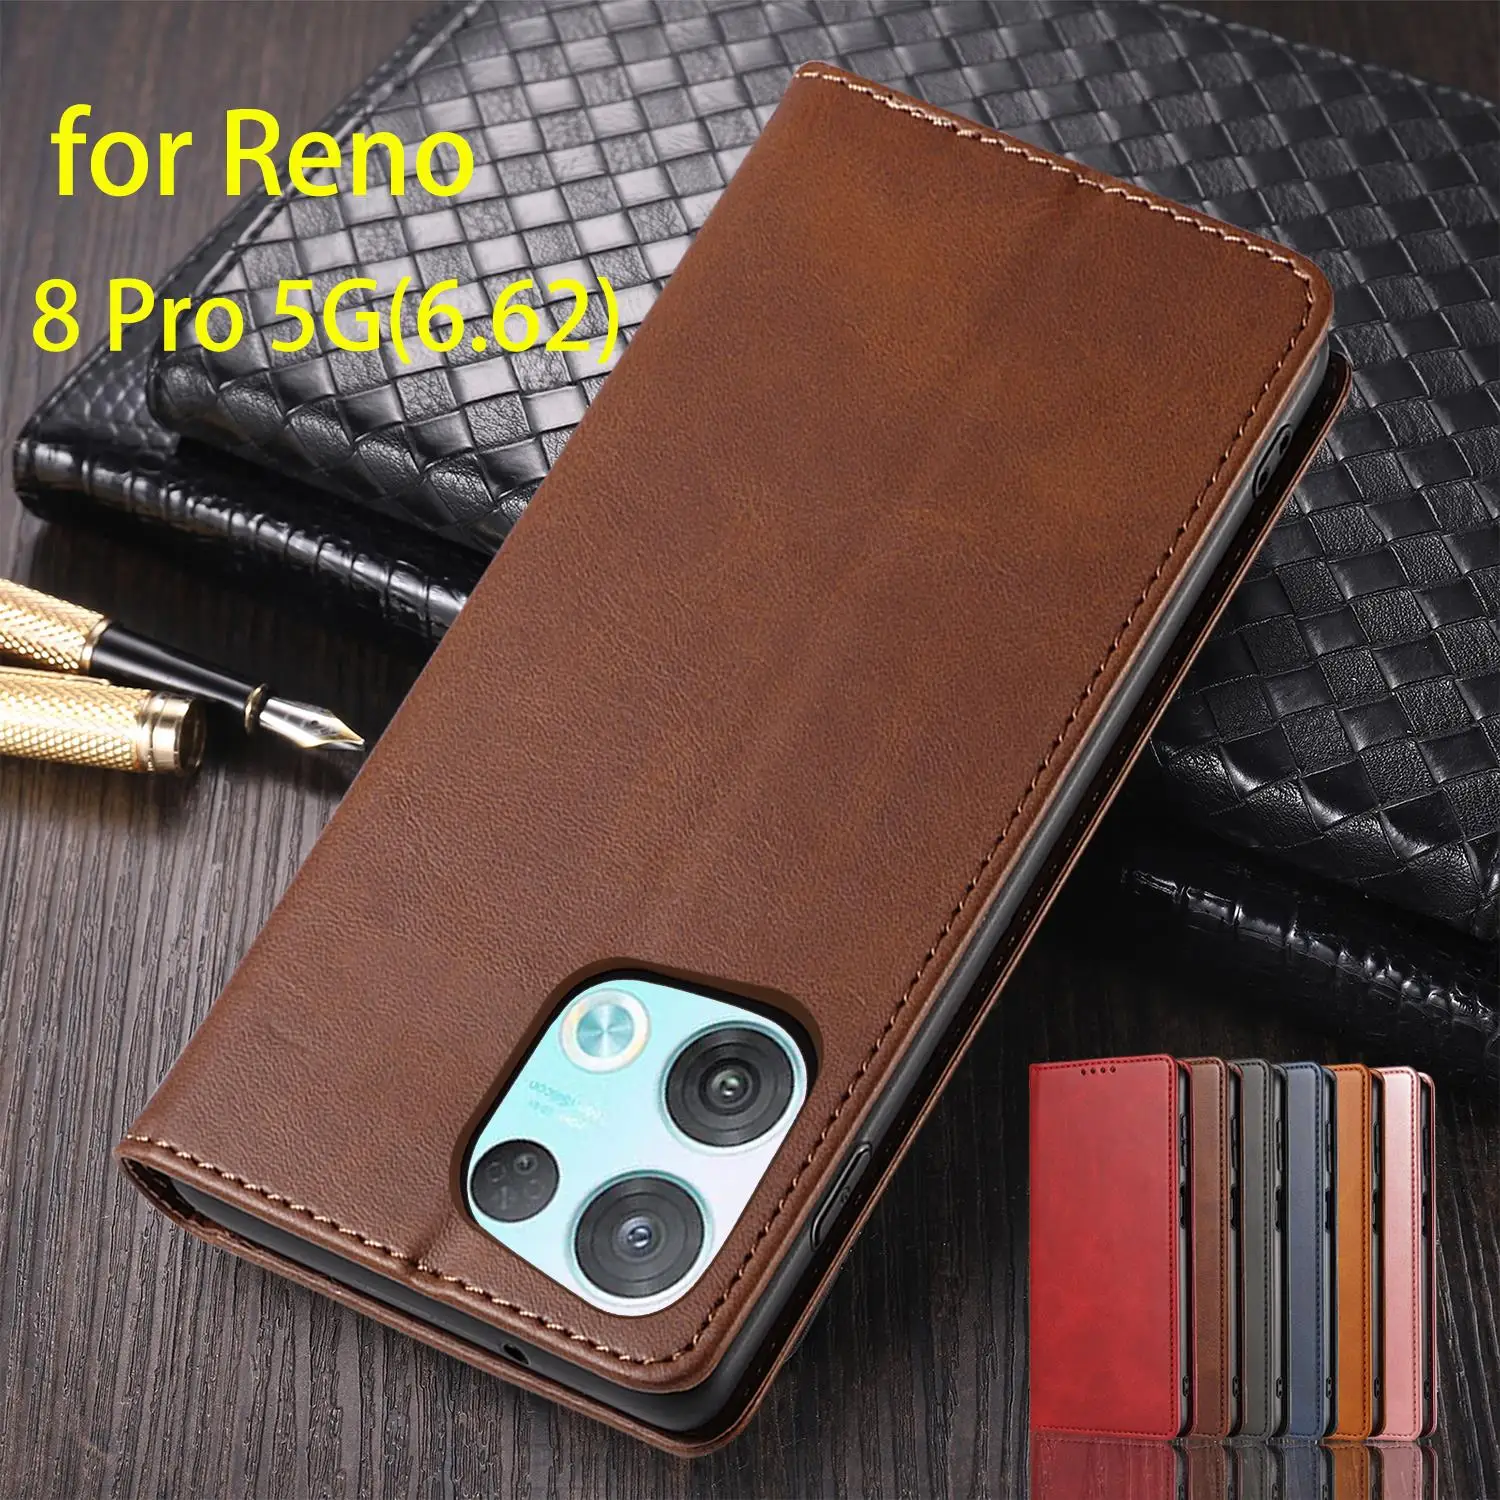 

Leather Case for OPPO Reno 8 Pro 5G / Reno8 Pro 5G (China 6.62") Holster Magnetic Attraction Cover Wallet Flip Case Fundas Coque